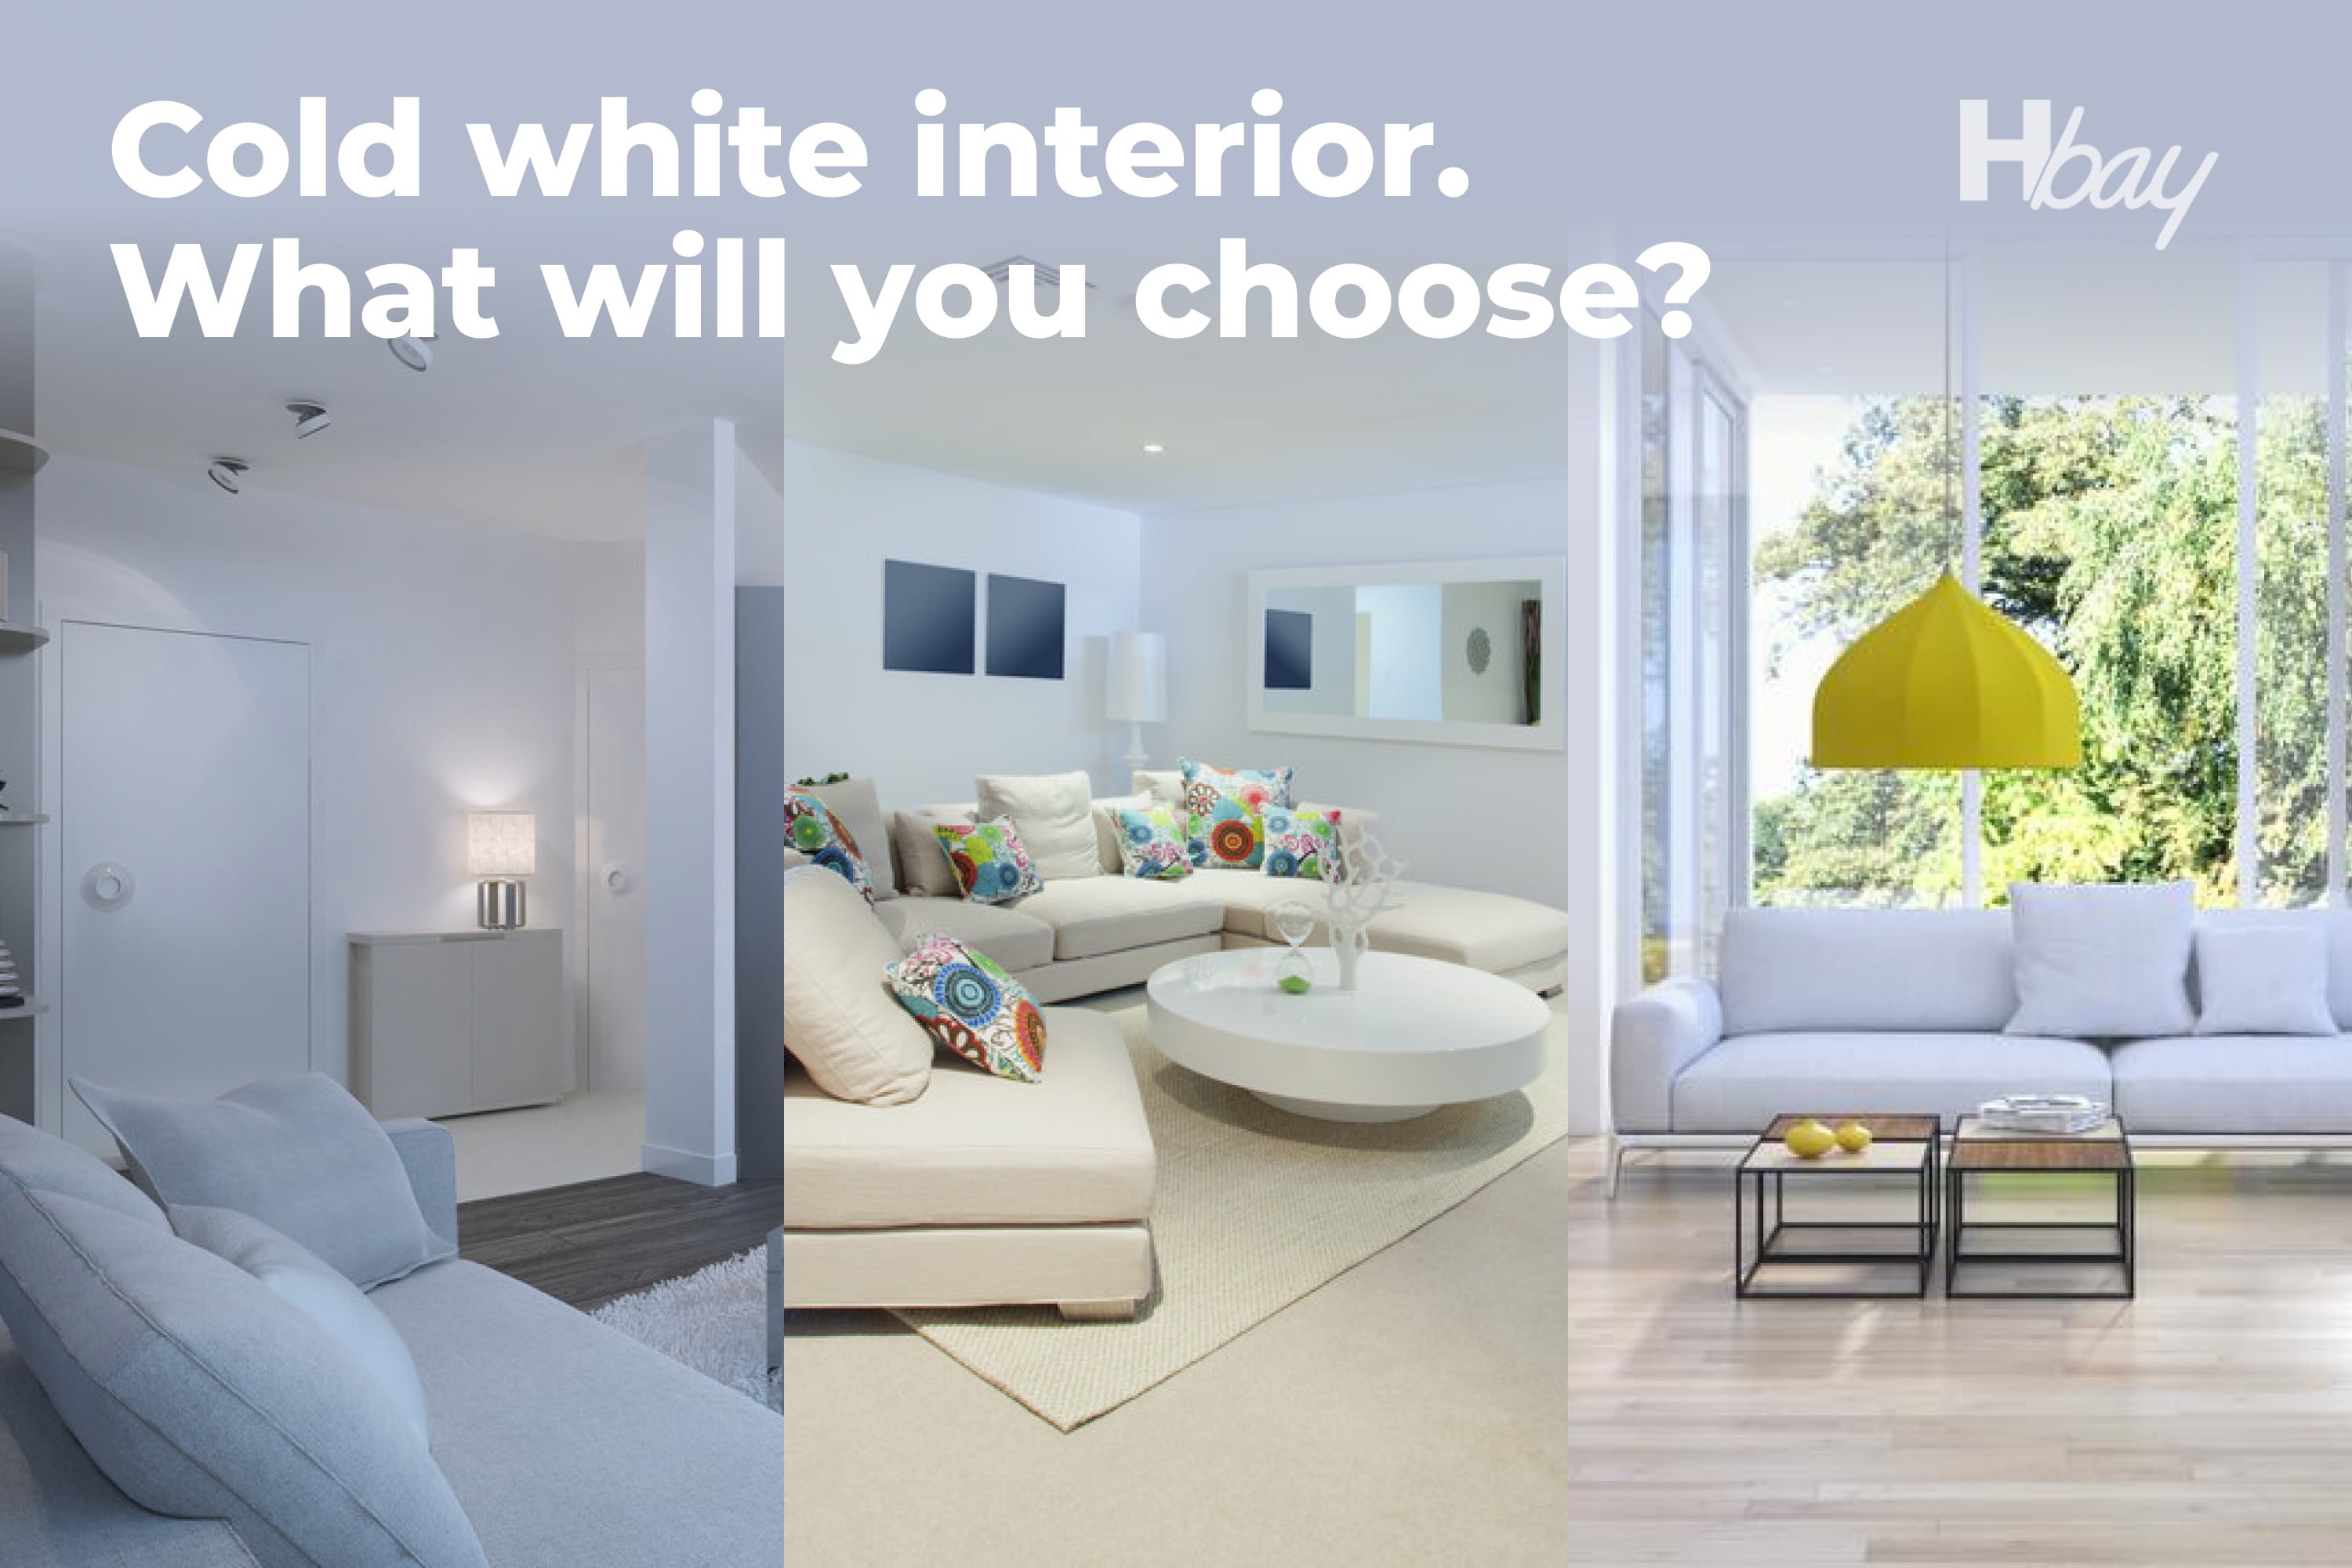 Cold white interior. What will you choose